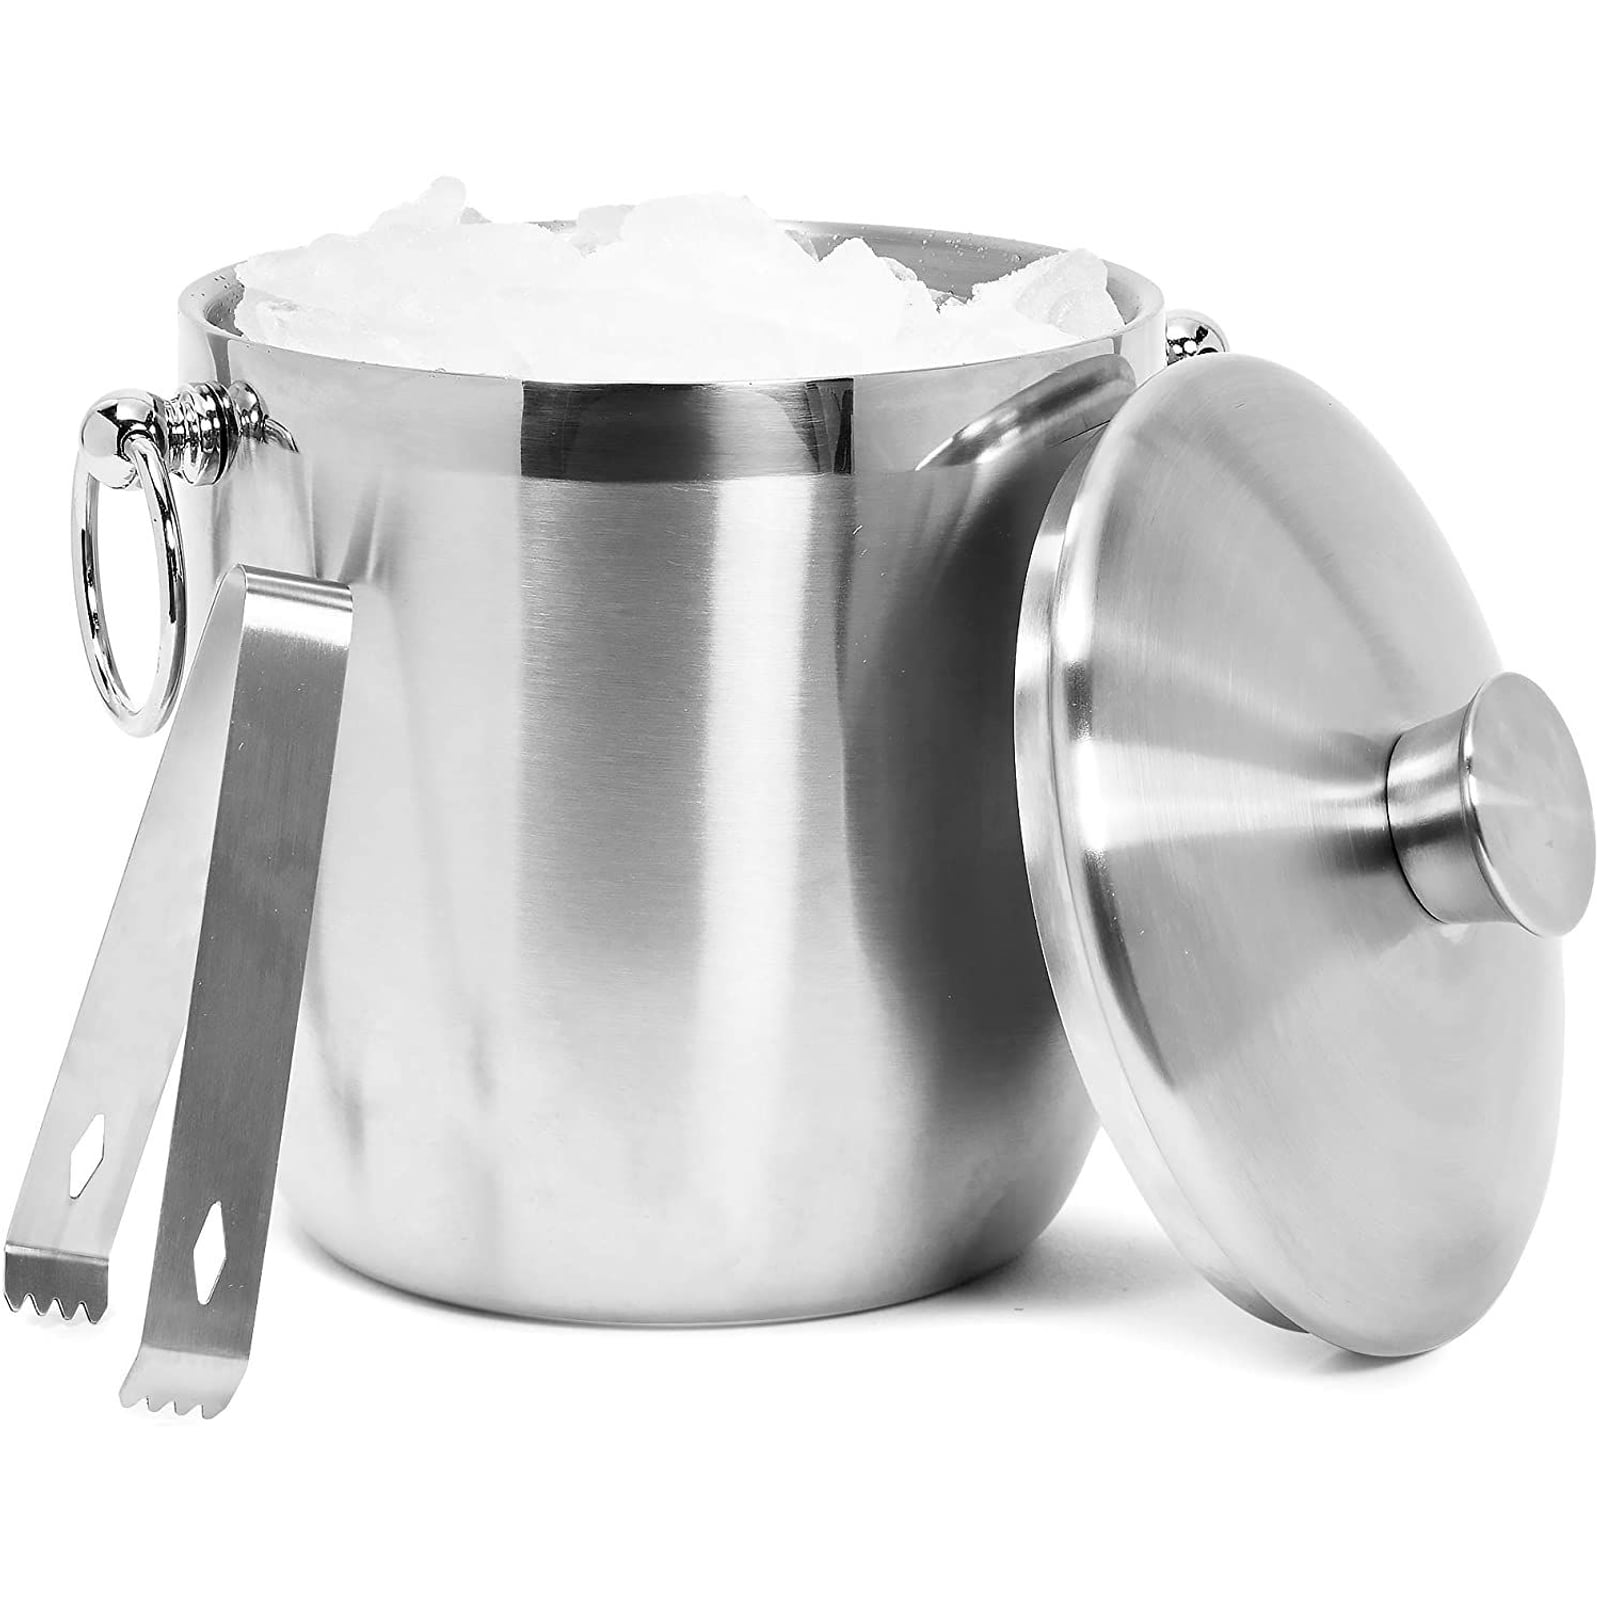 STAINLESS STEEL ICE CUBE TONGS KITCHEN BAR COCKTAILS FOR BUCKET TRAY BBQ PARTY 